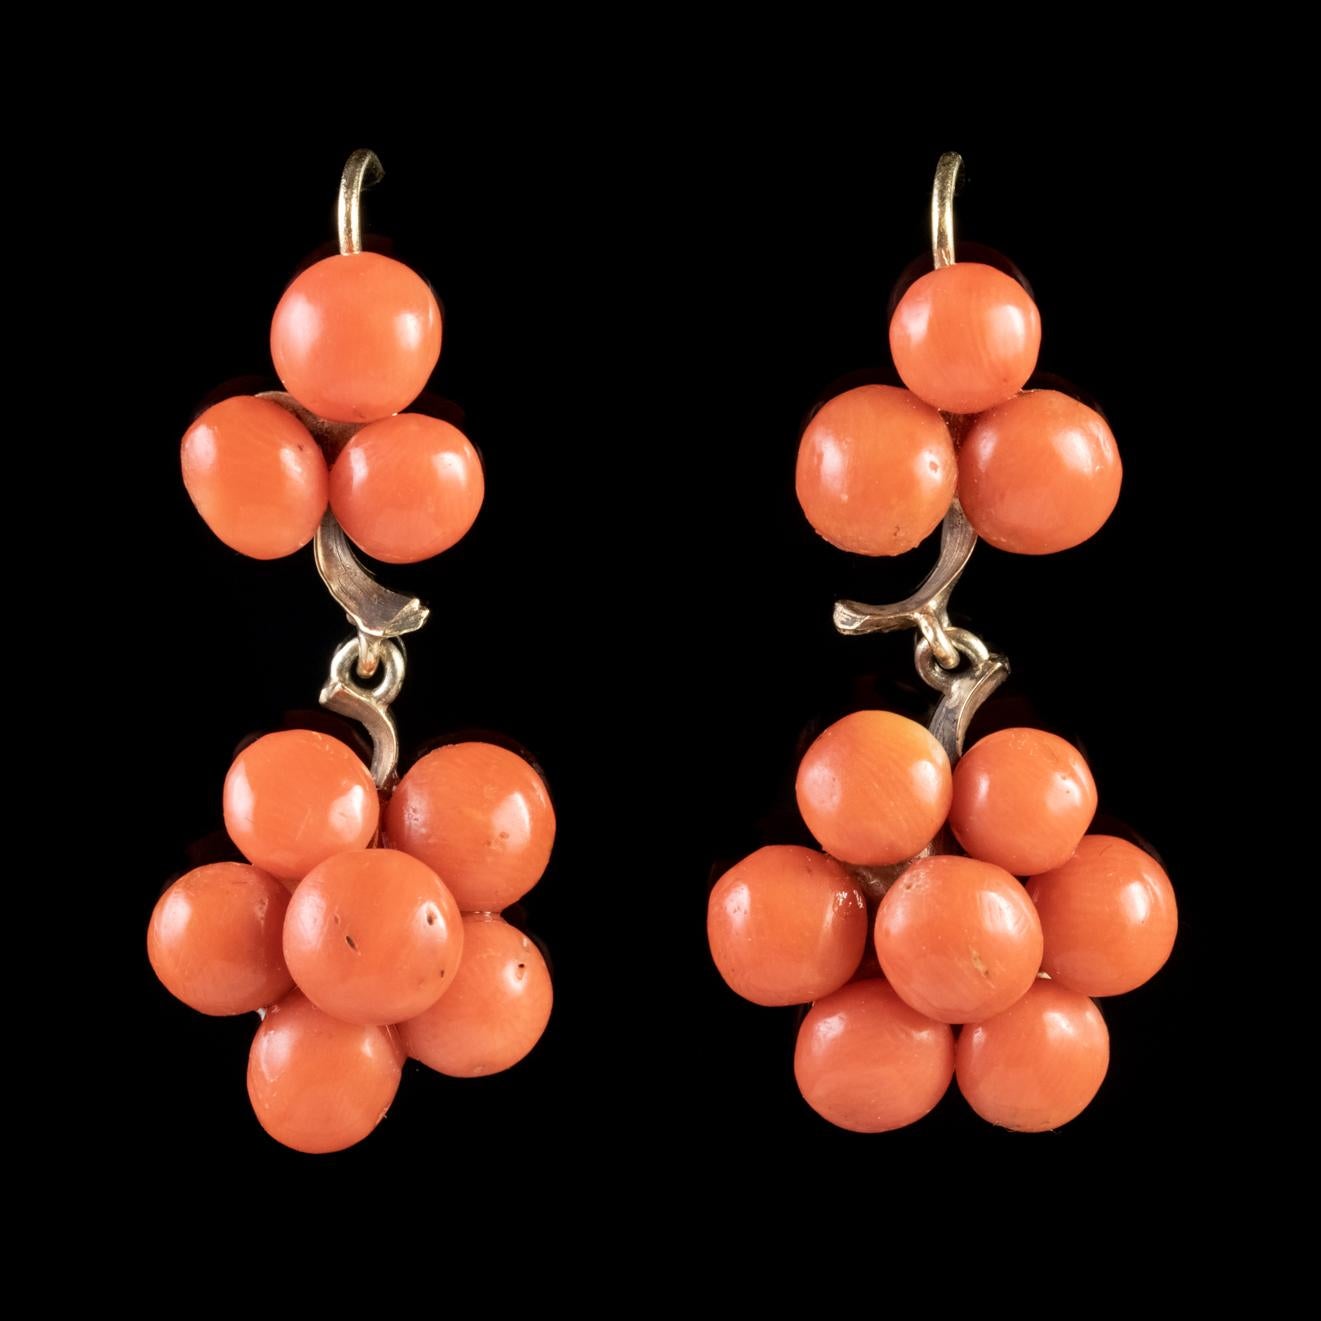 A beautiful pair of Antique Victorian double drop earrings decorated with lovely Coral stones arranged in the shape of what appears to be a three-leaf clover on top and a flower underneath. 

Similar to Pearls, Coral is made naturally in the depths